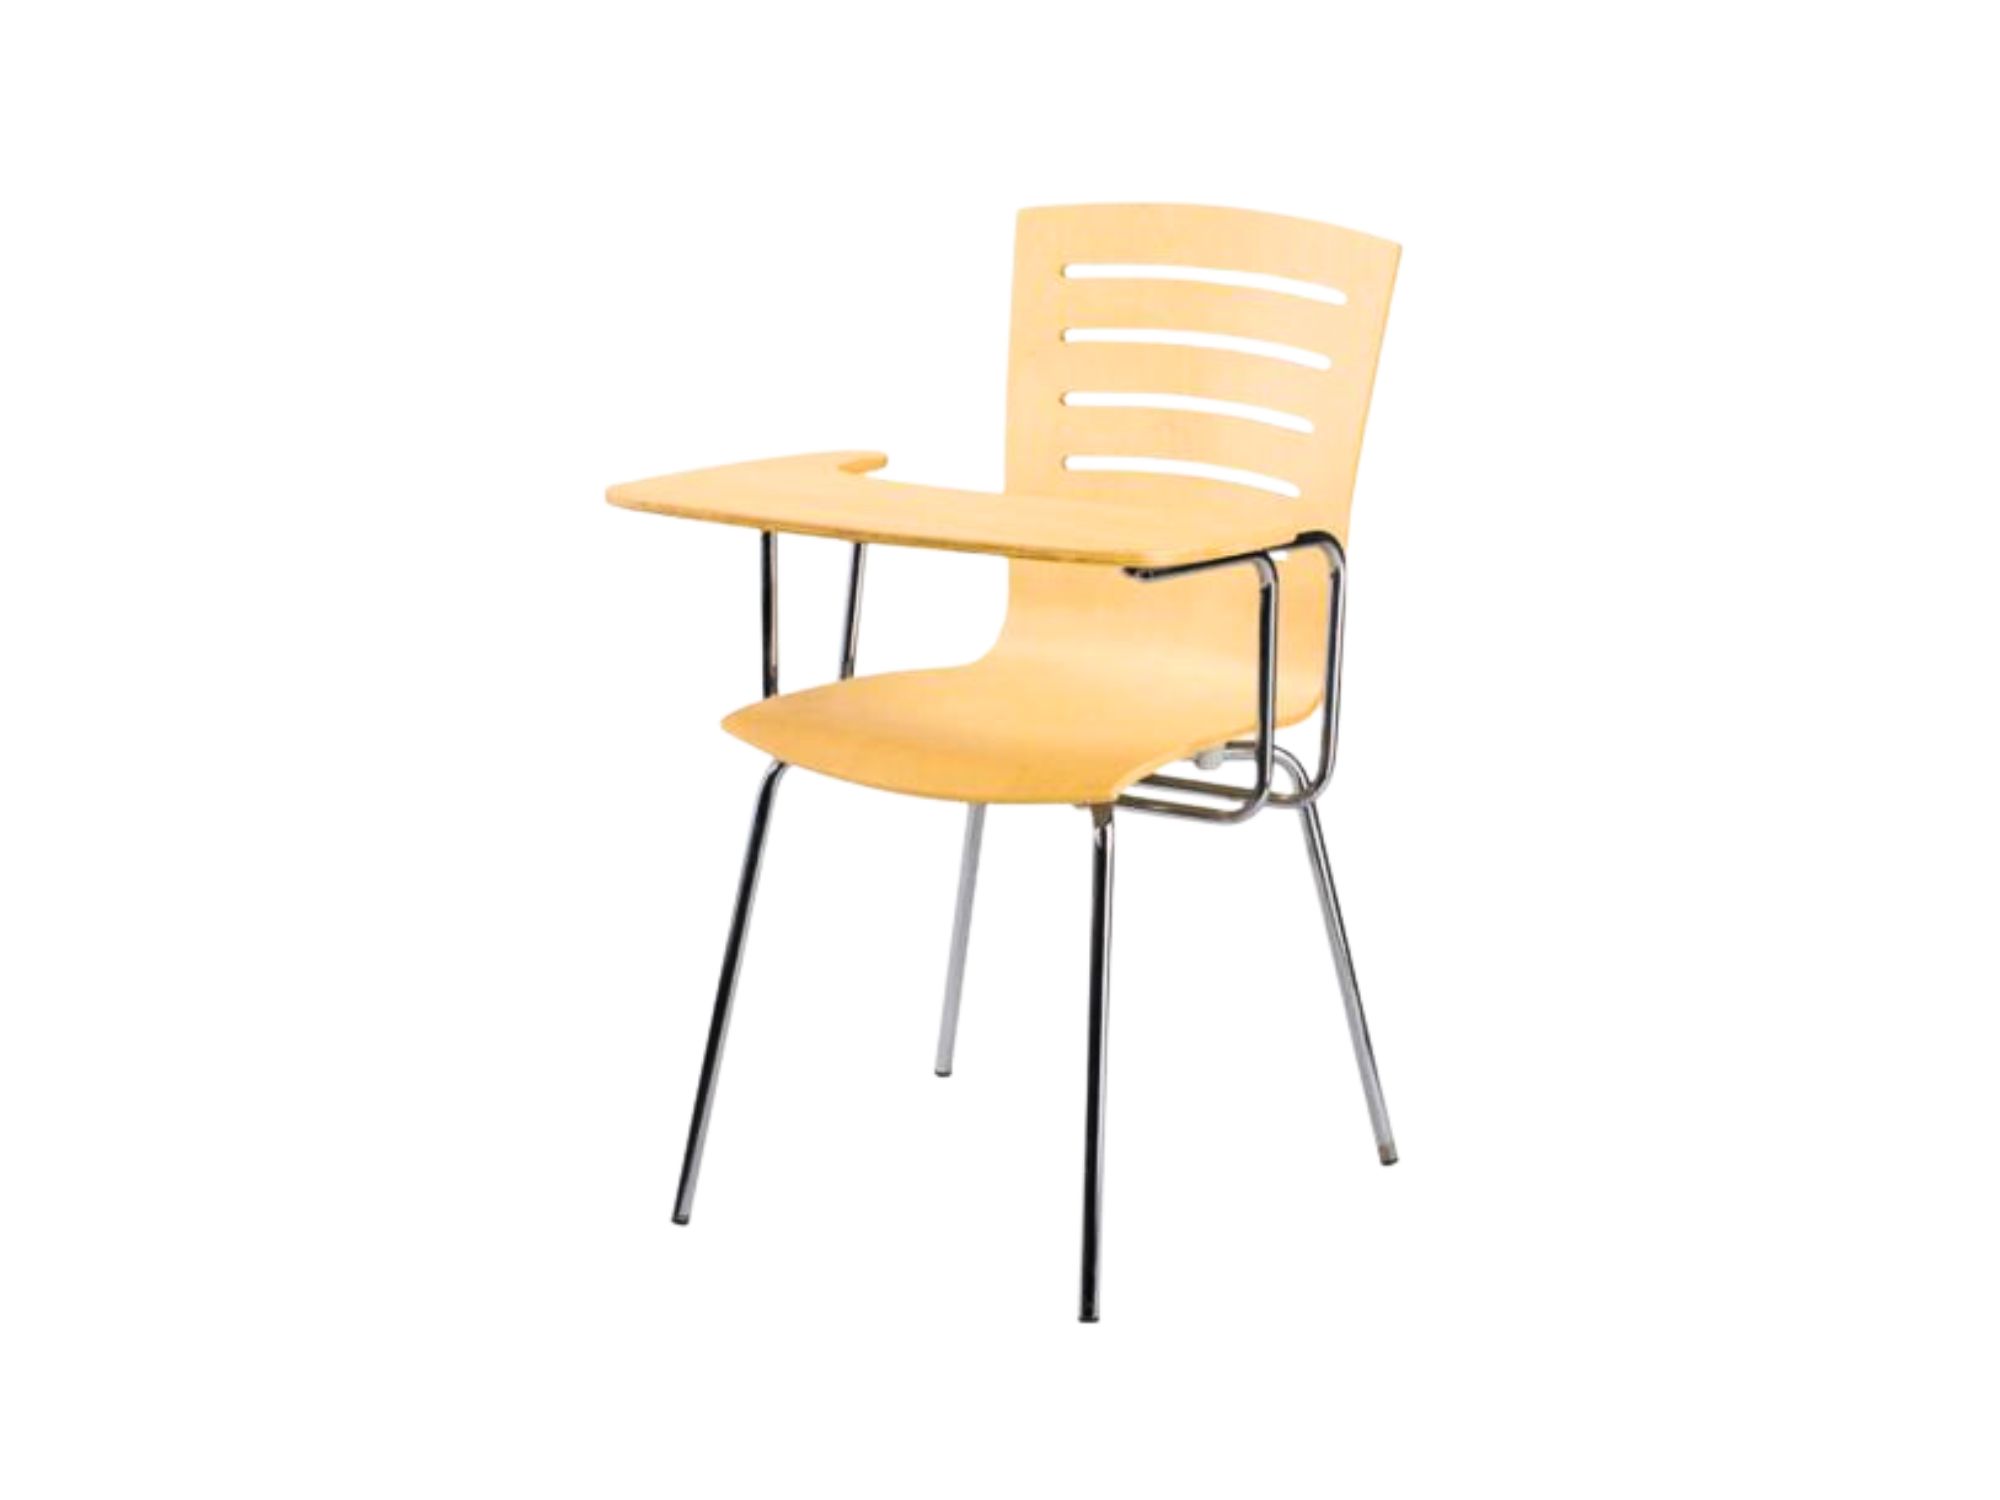 Best Educational Chairs